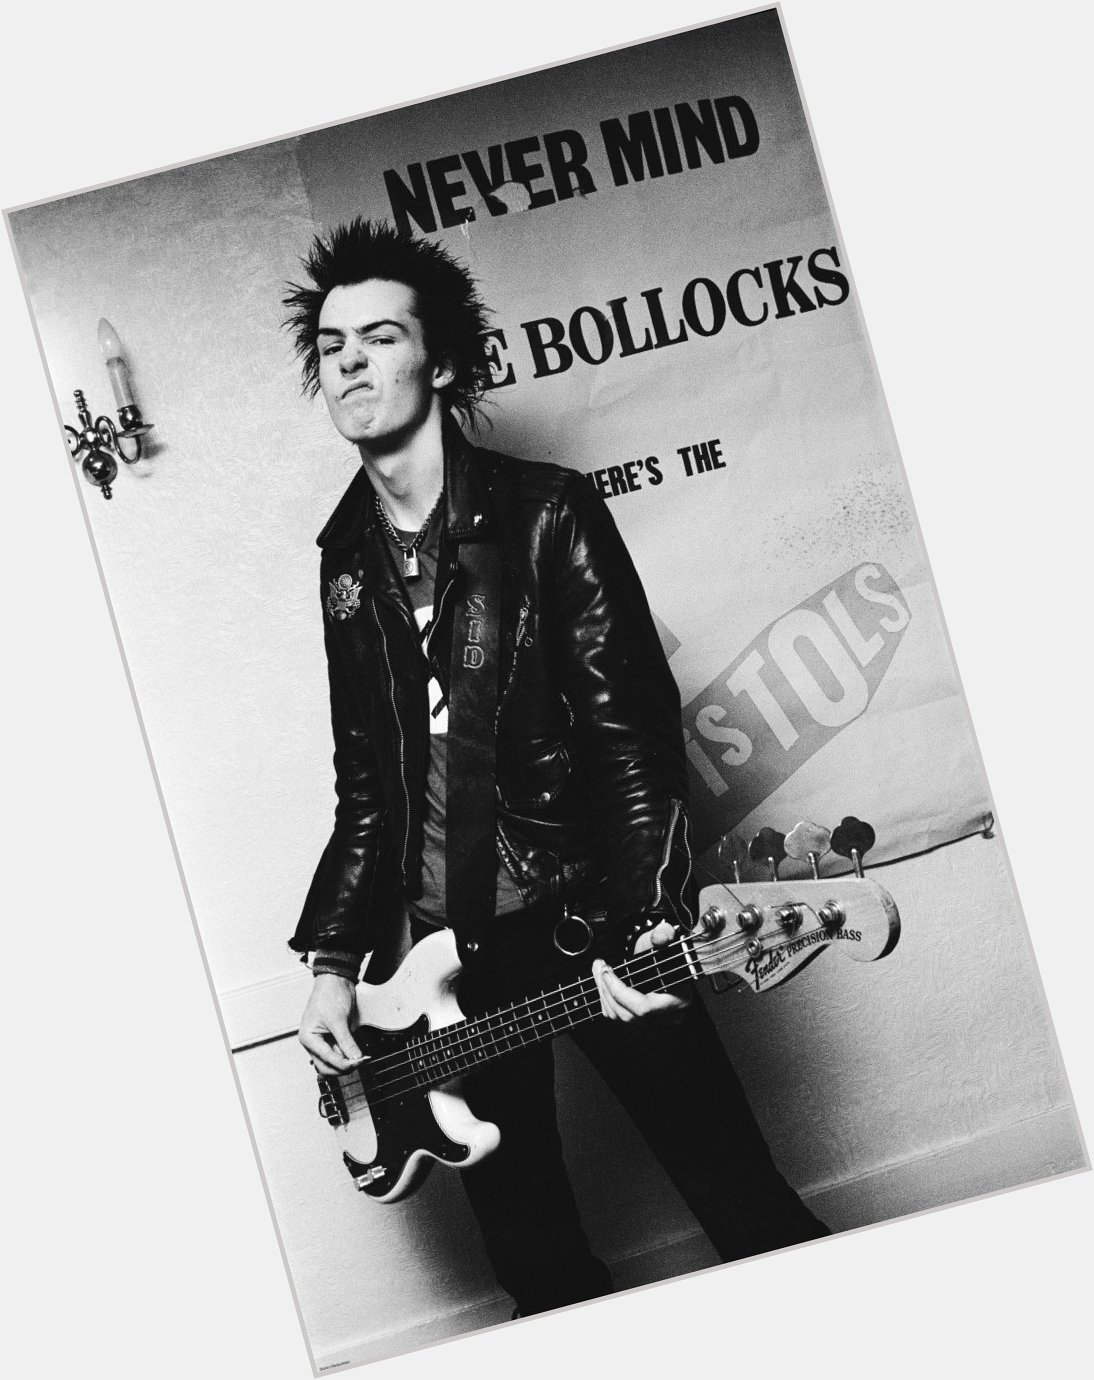 Happy Birthday to Sid Vicious, who would have turned 60 today! 